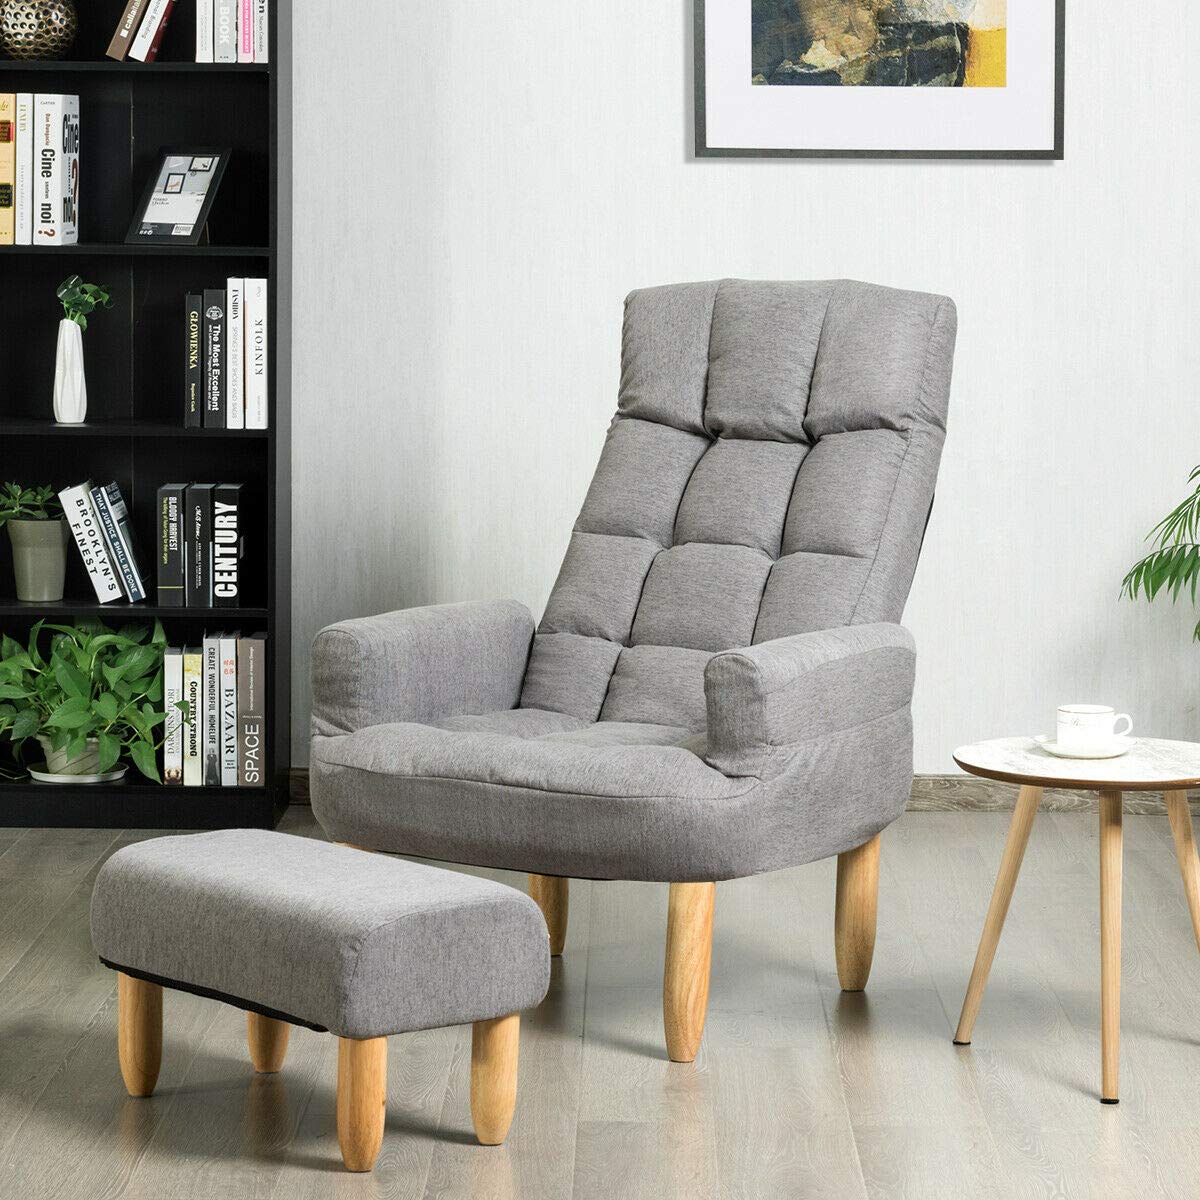 Comfortable Reading Chairs And Sofas